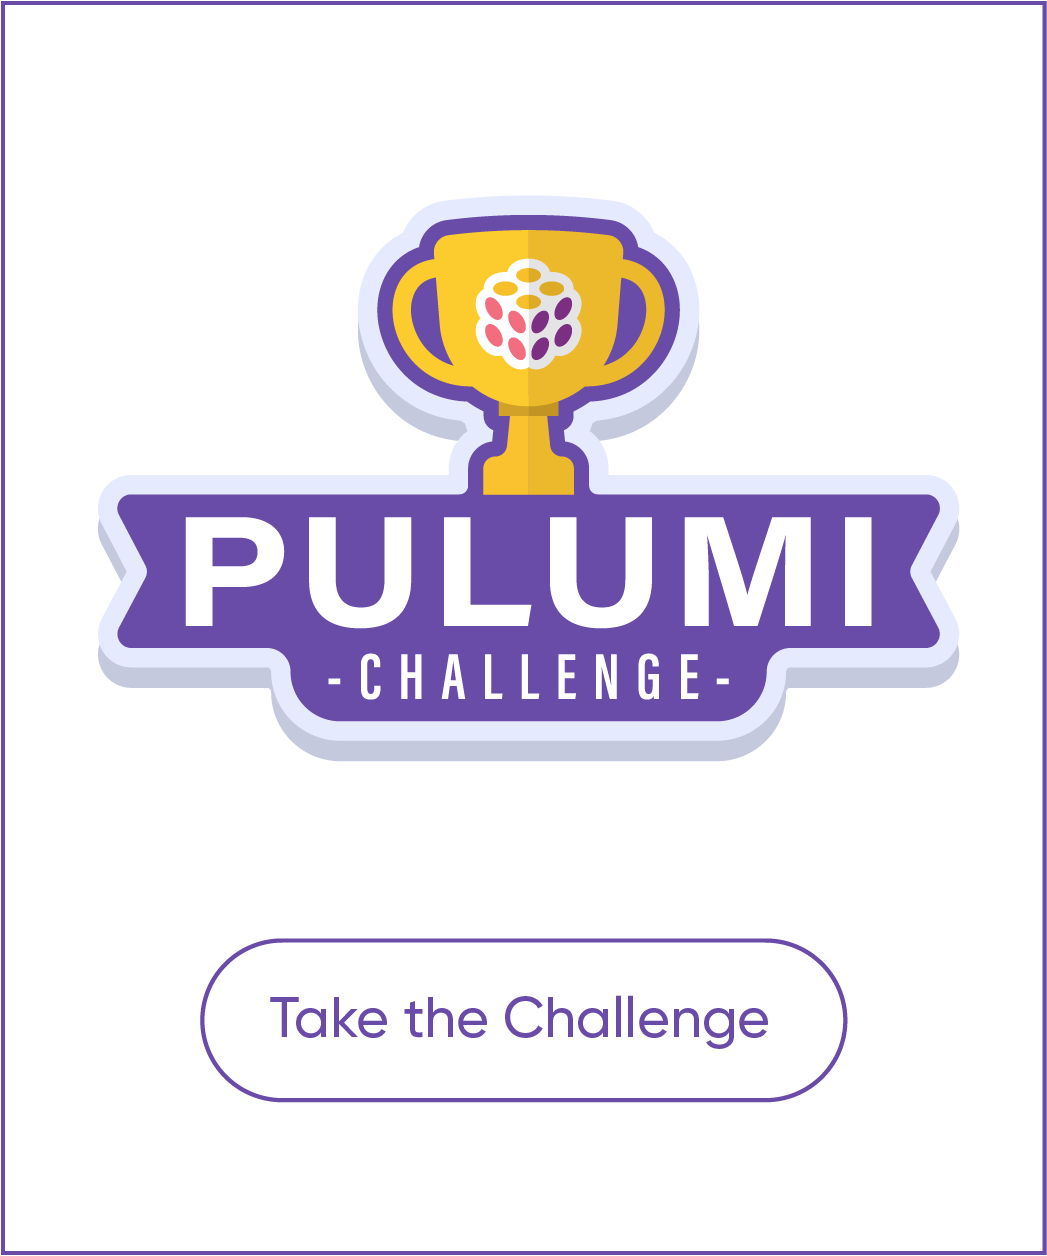 Try the Pulumi Challenge